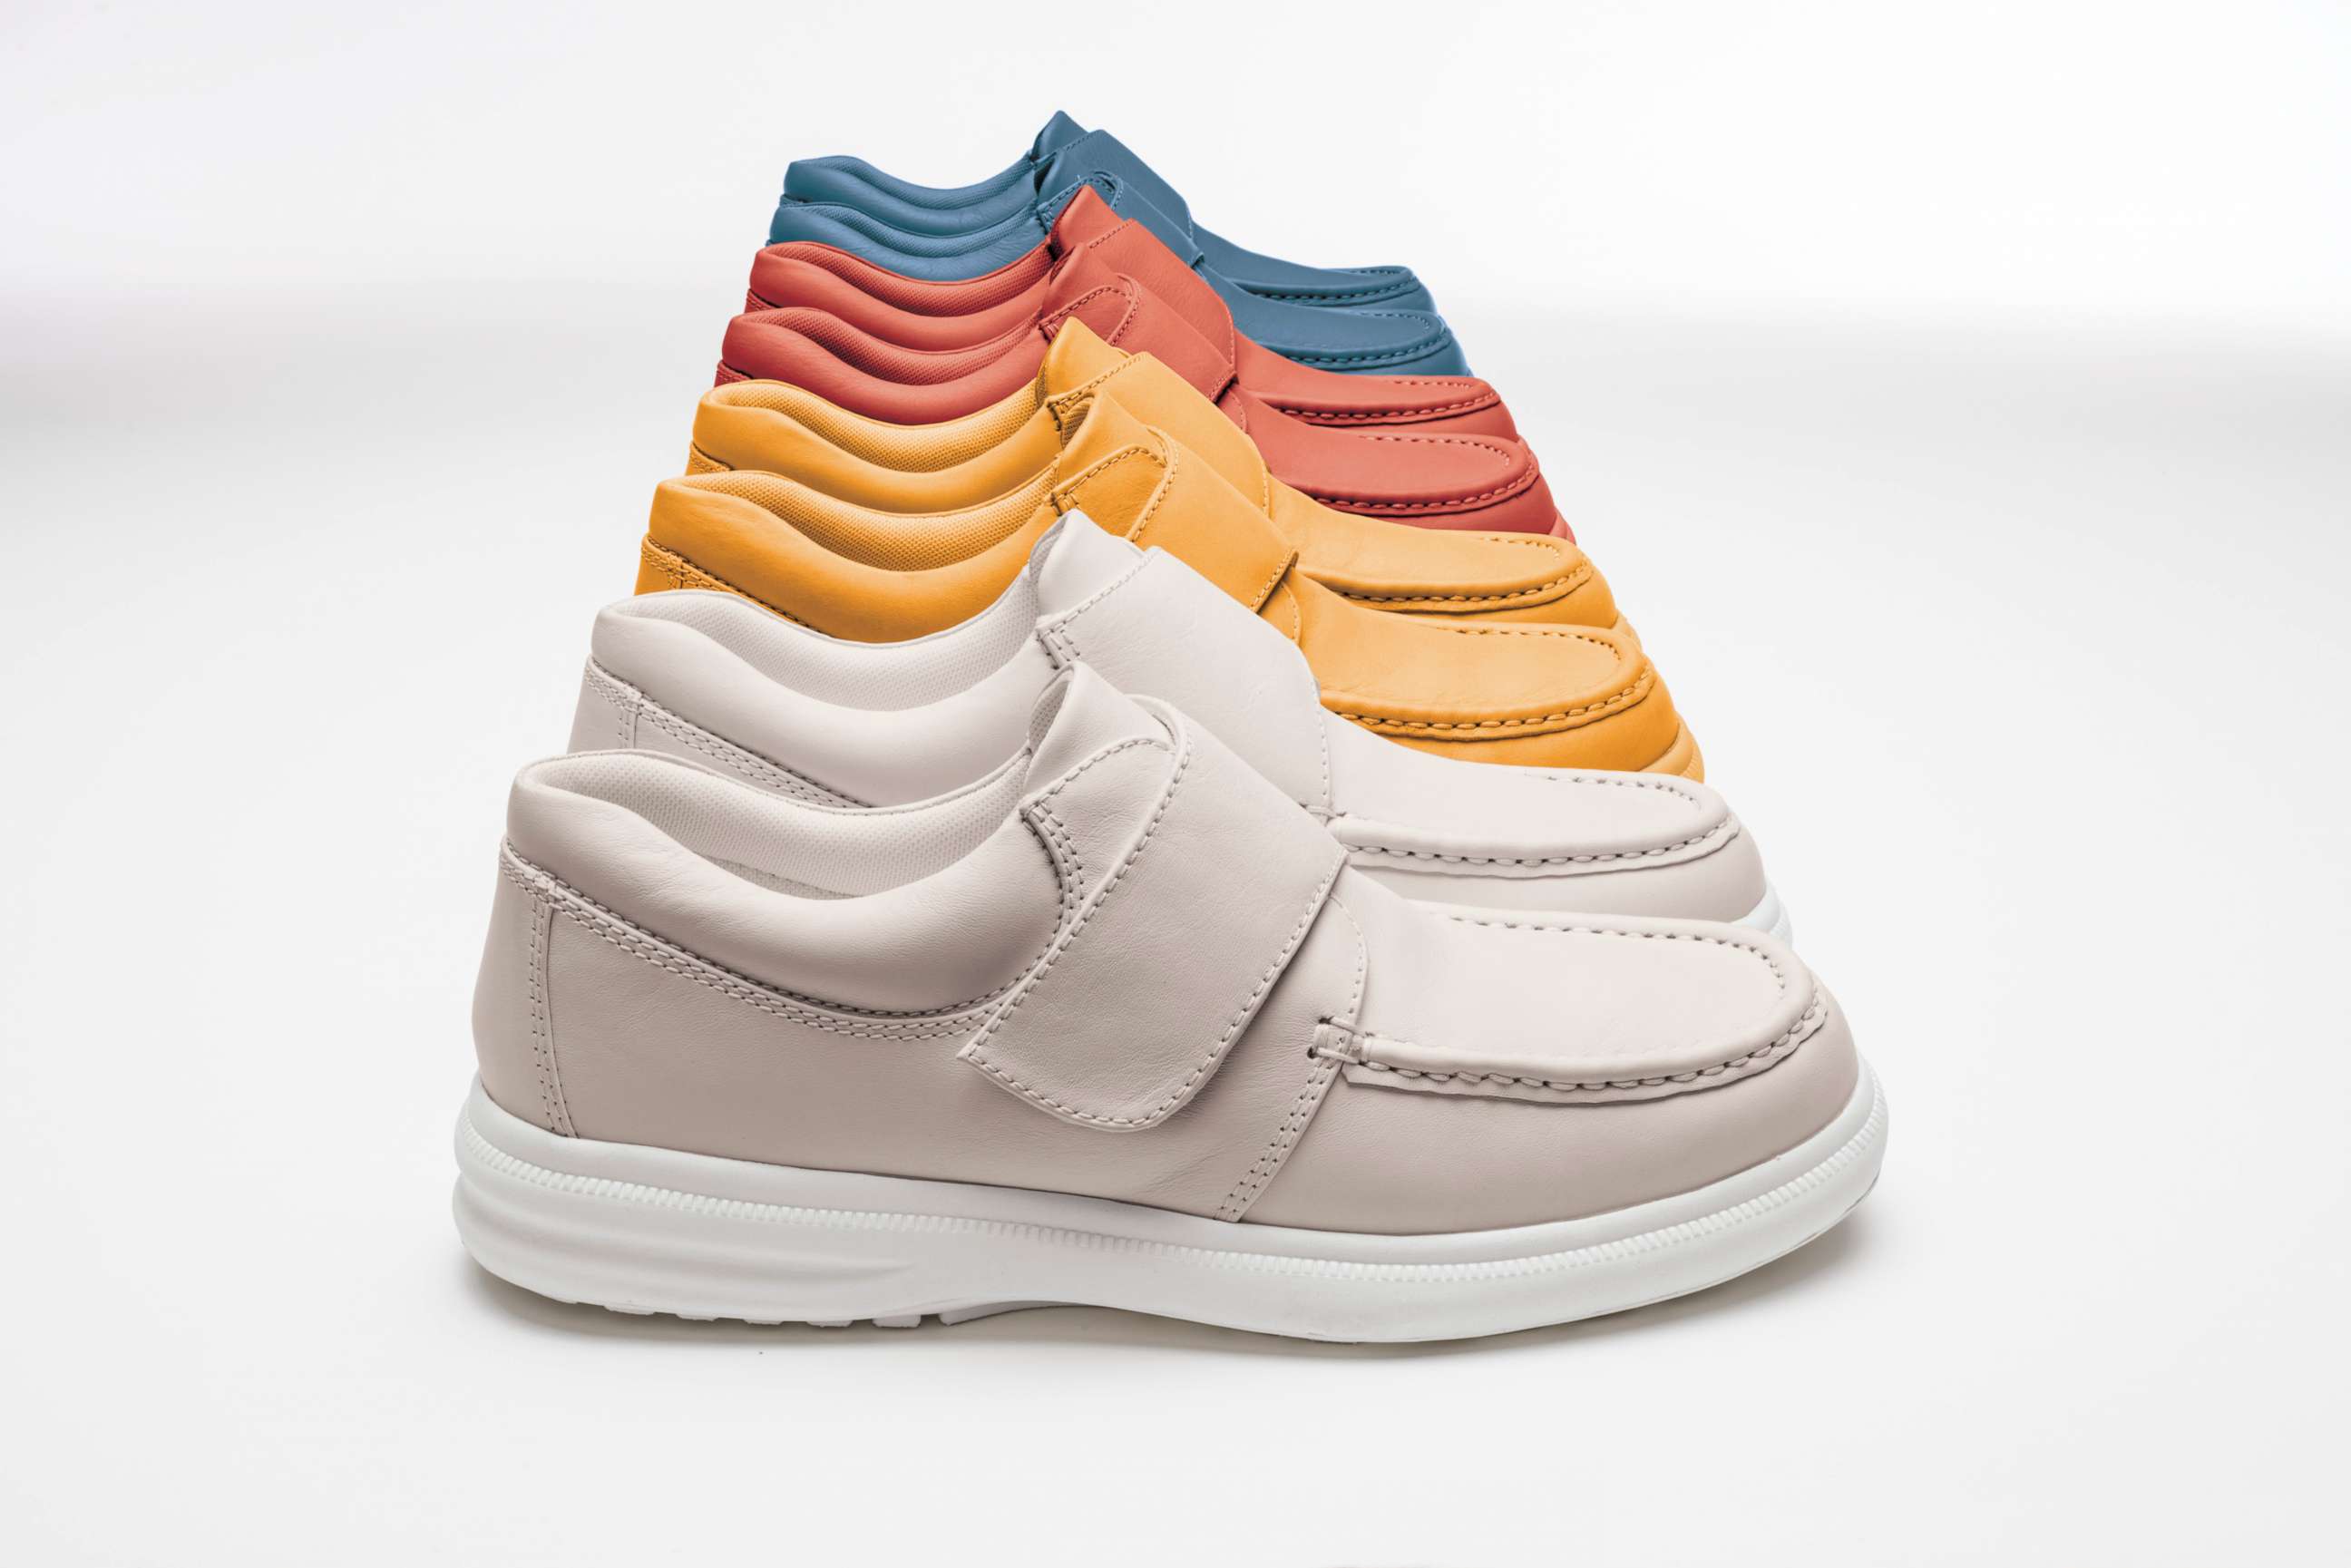 PHOTO: Crafted in smooth full grain leather, Hush Puppies' Gil slip-on men’s sneakers are for guys of every generation thanks to the new range of colors that up the fashion ante on these traditional sneakers.